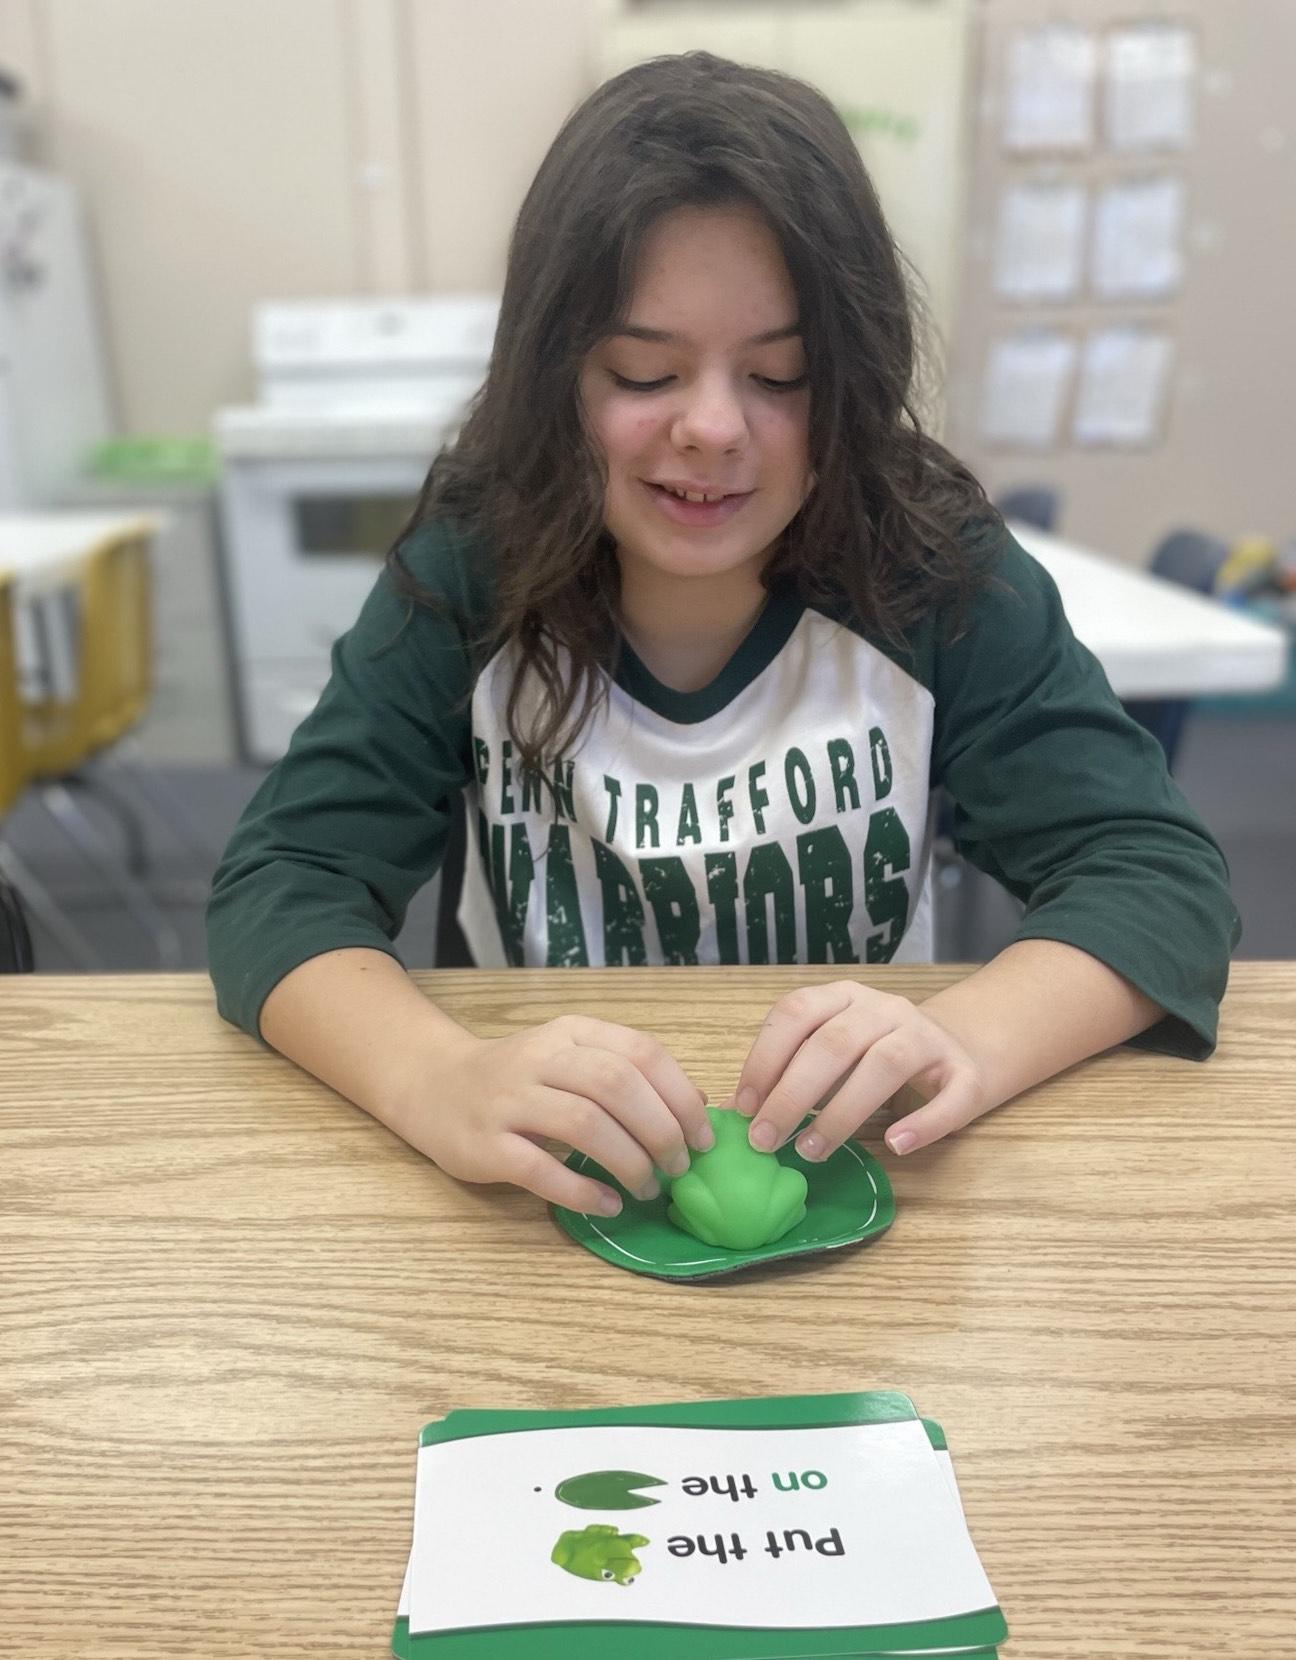 Gianna Acker works on learning new spatial/positional terms such as “on, under, beside, to the left/right” by moving the frog and other objects to different locations